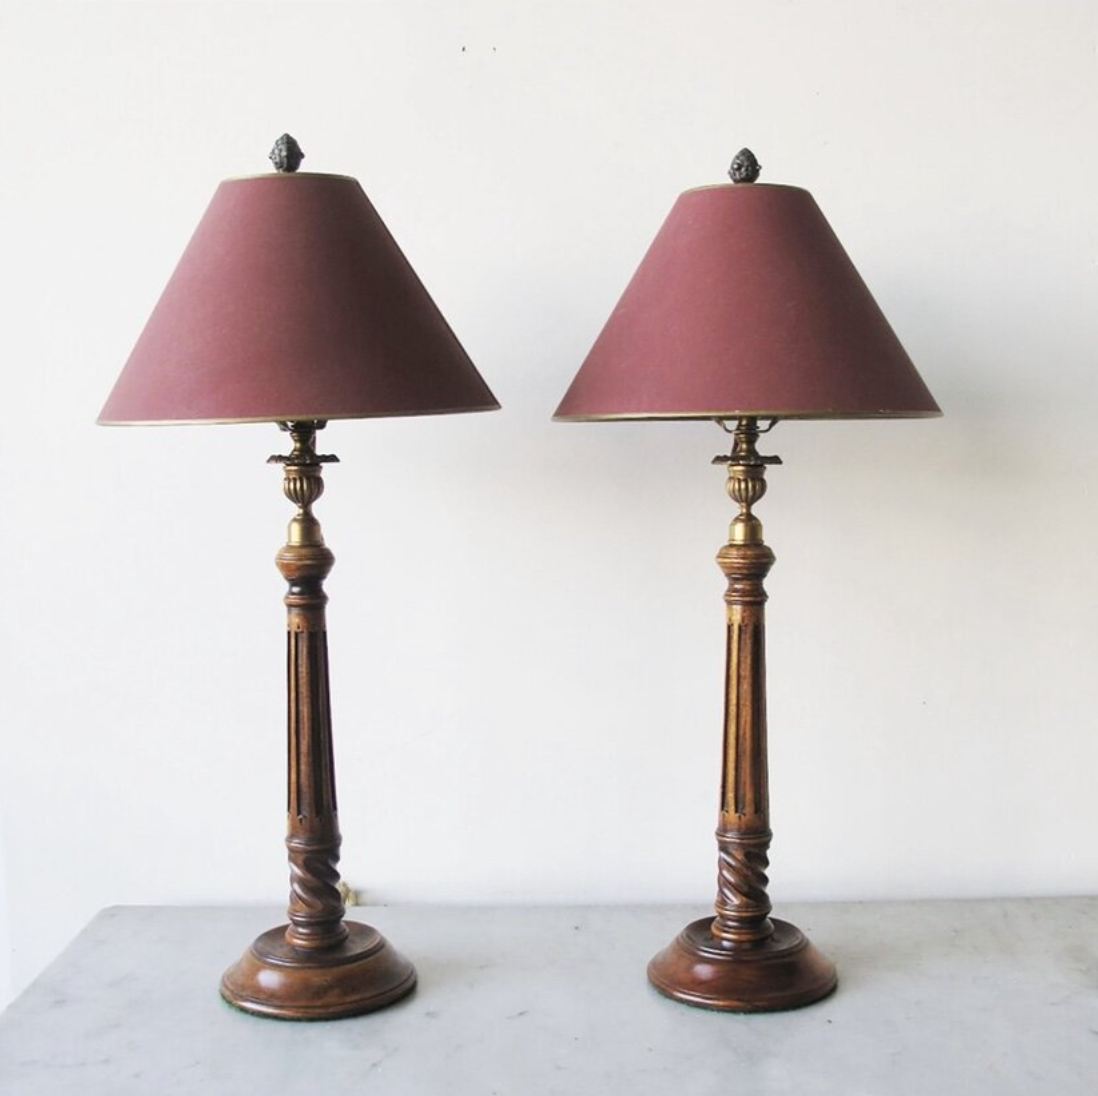 Van Royen Antiques, Pair of 19th Century George III Style Mahogany Candlestick Lamps